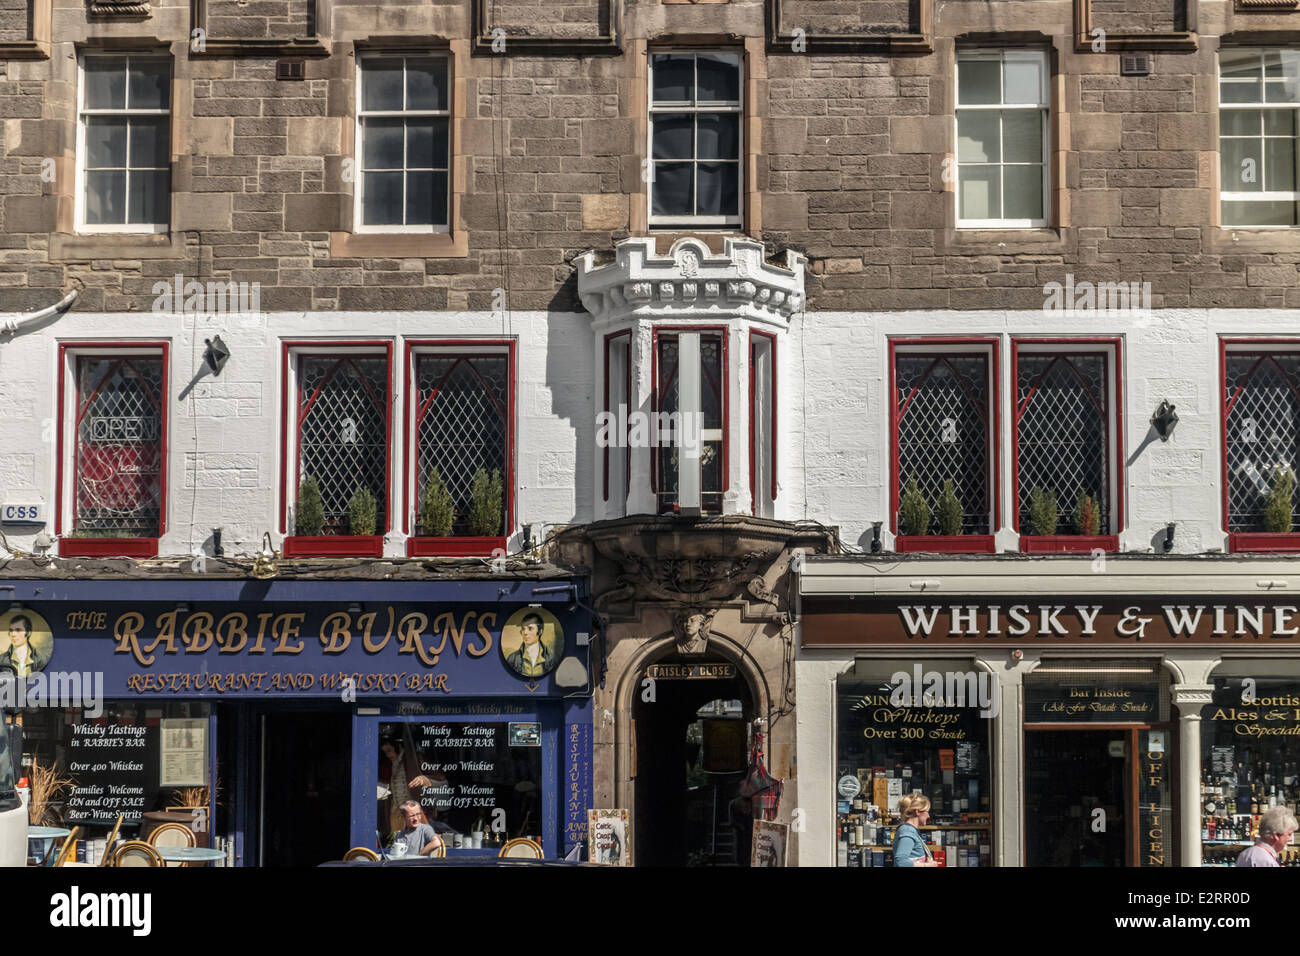 Whisky Bar High Resolution Stock Photography and Images - Alamy